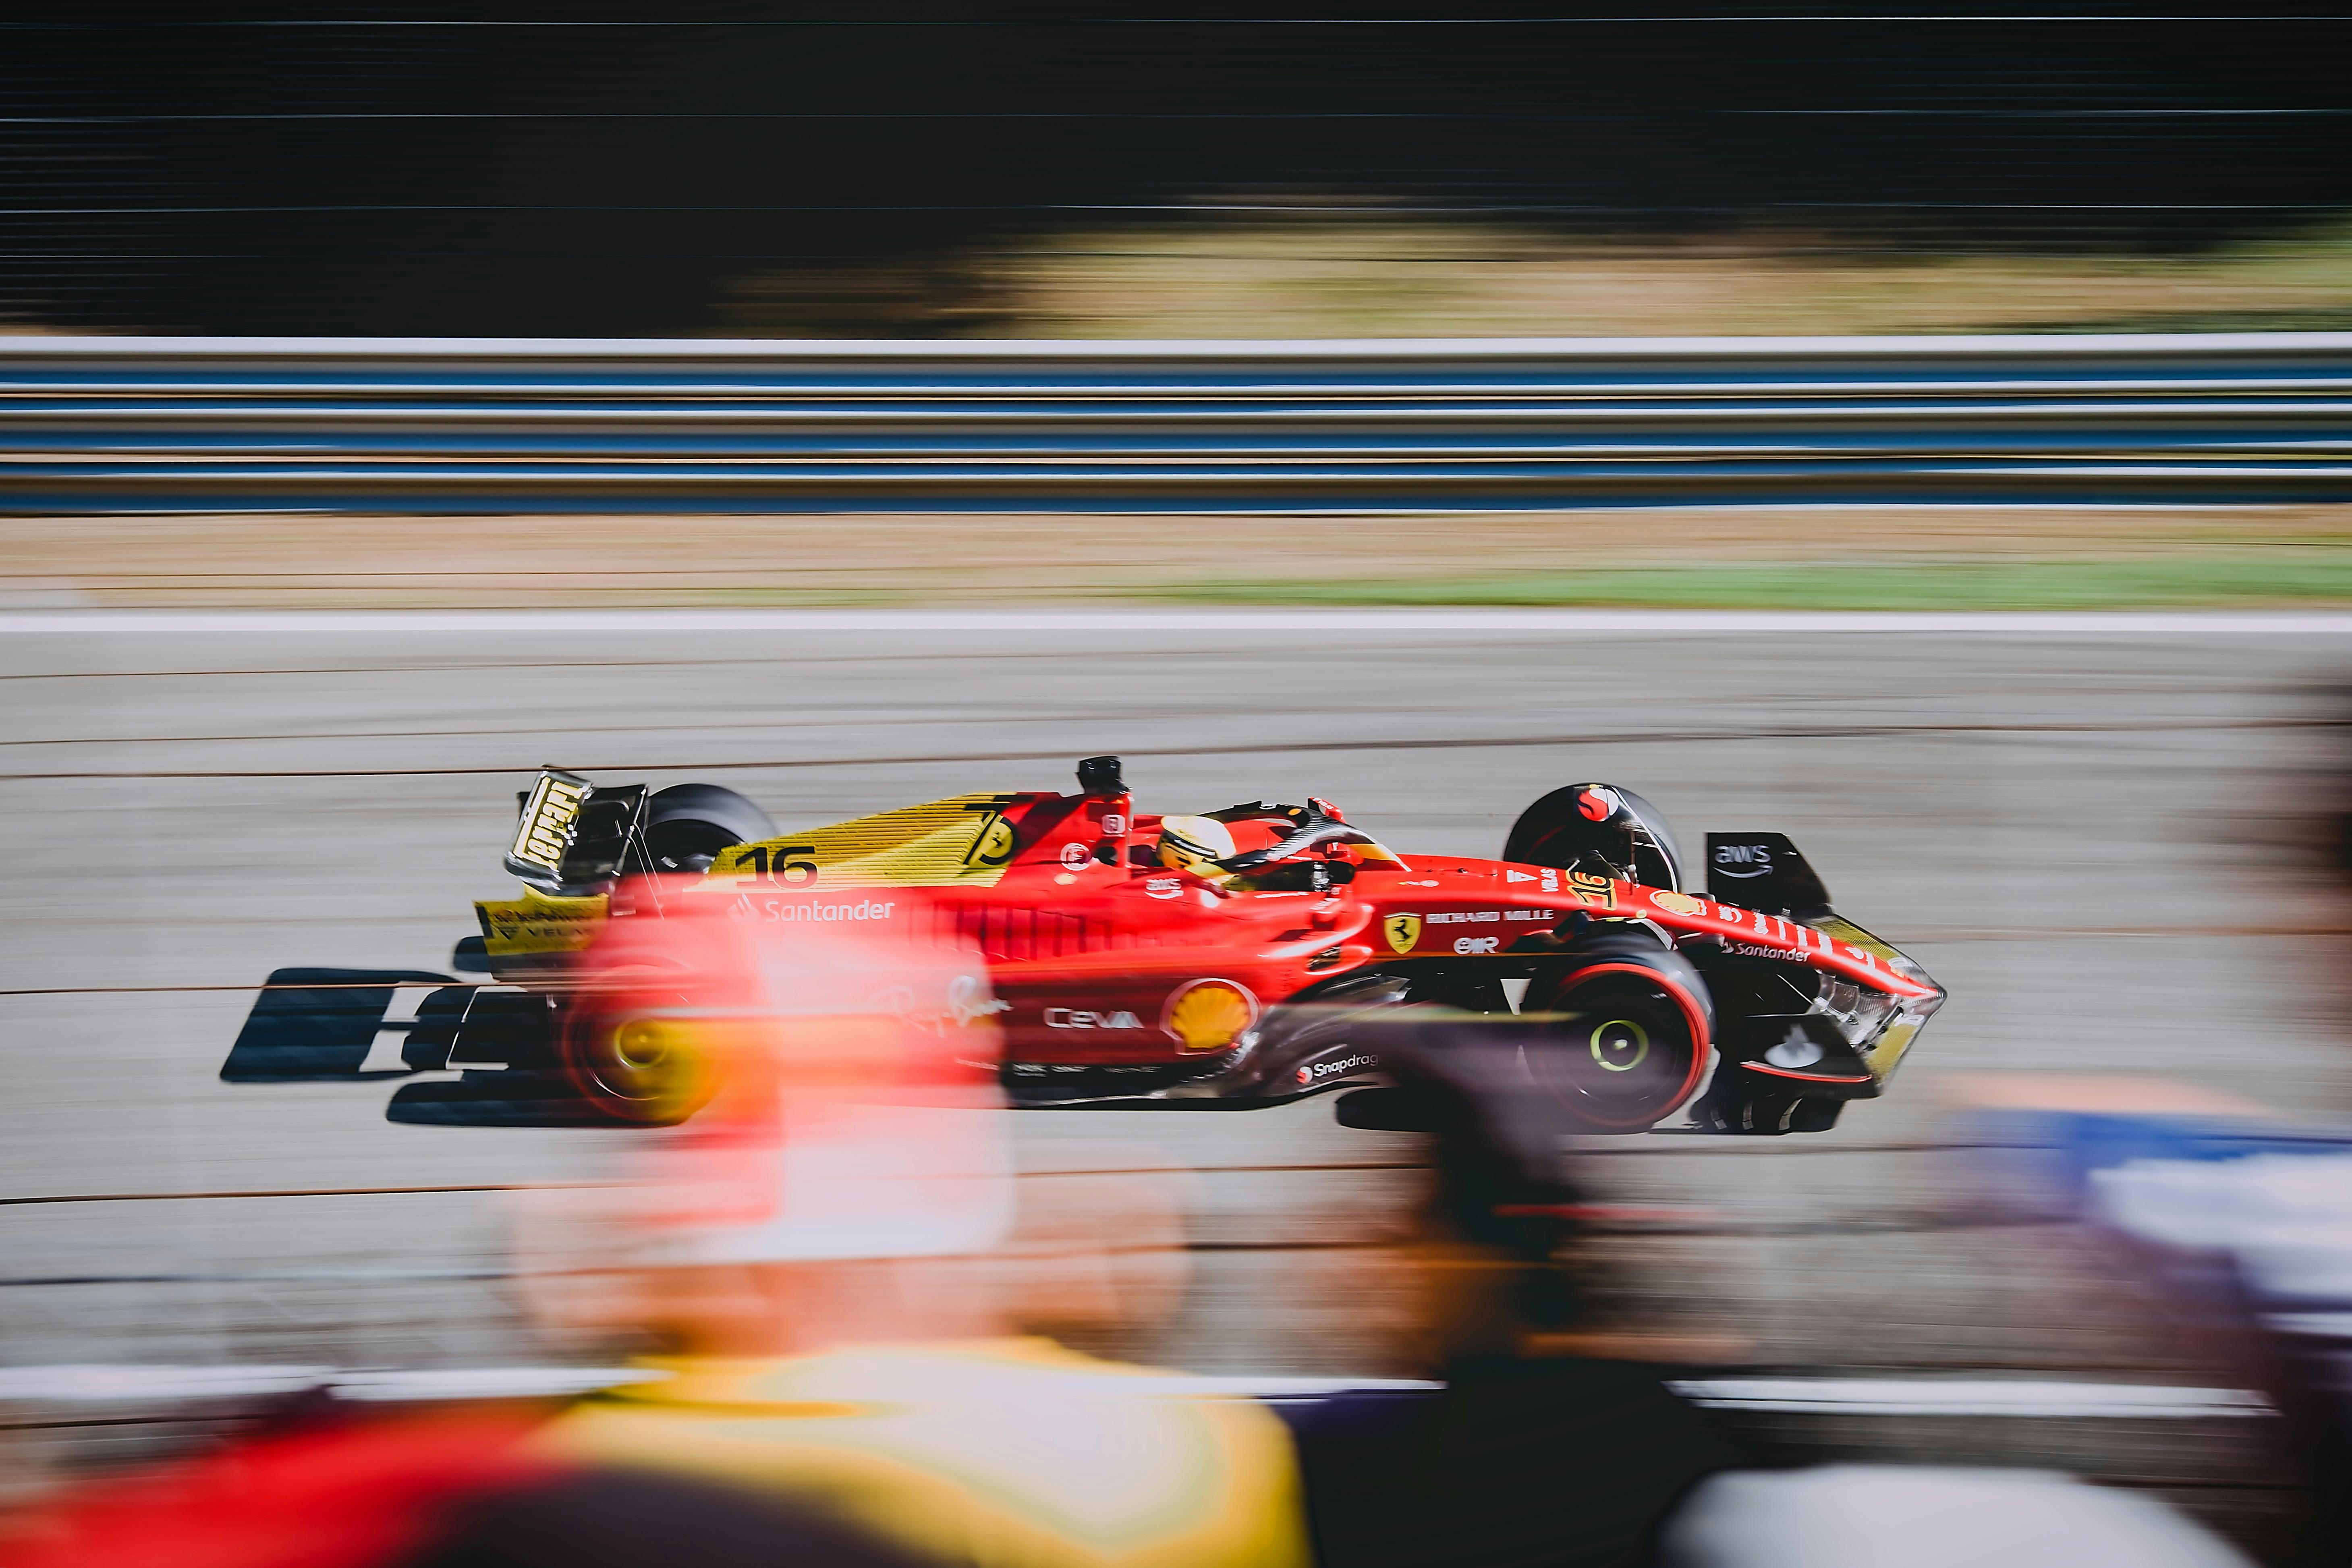 blurred motion of the scuderia ferrari race car driven by charles leclerc with a special livery for the